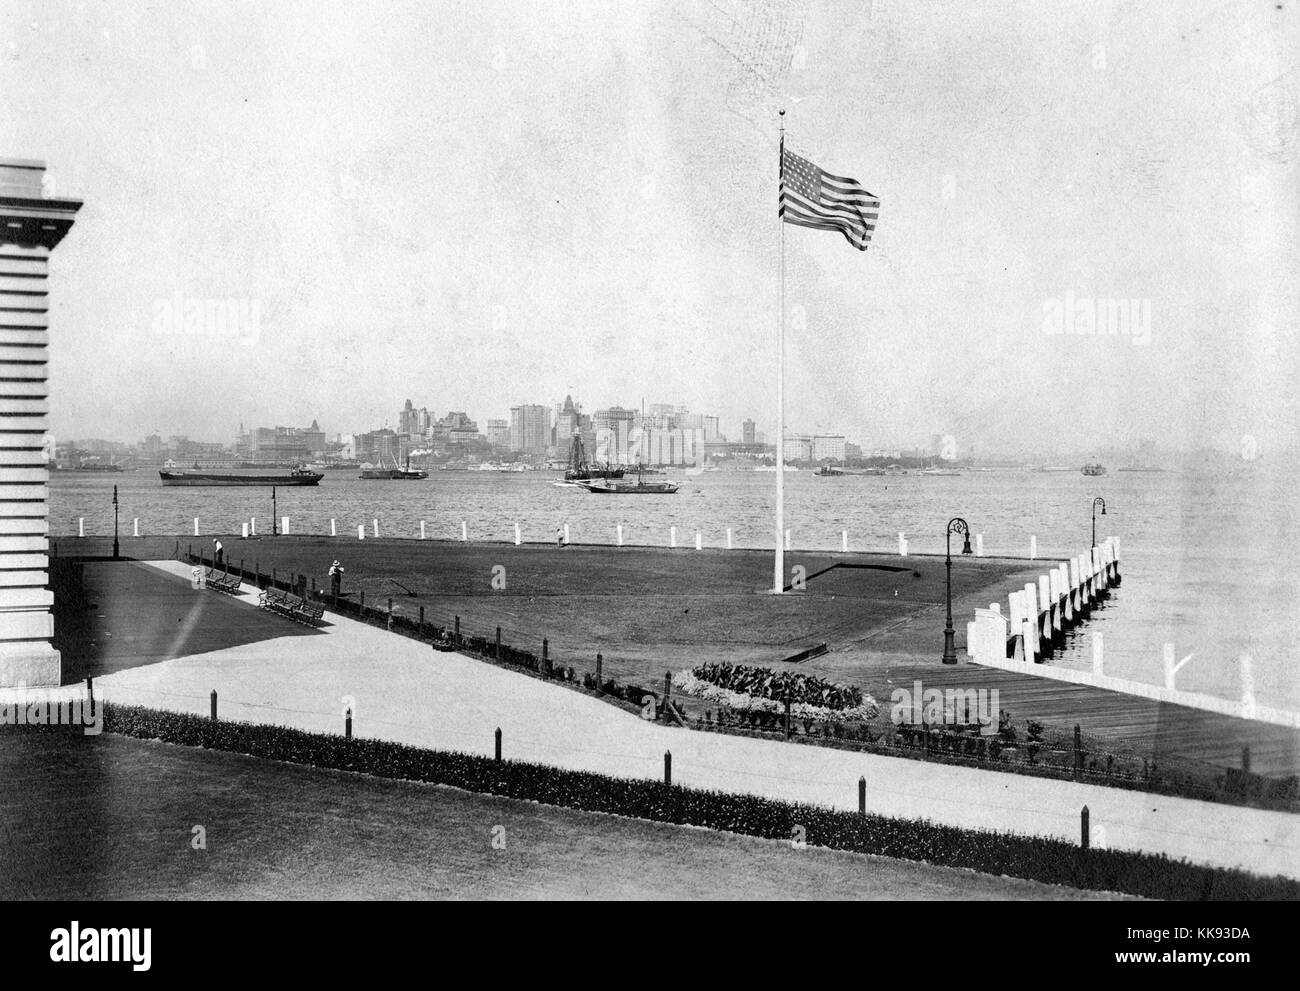 A photograph showing a portion of the lawn that surrounds the immigration inspection station on Ellis Island, the French Renaissance Revival building is constructed with red bricks and limestone trim, the building was first opened on December 17, 1900, it was closed in 1954 after processing over 12 million immigrants entering the United States, a flag is being flown outside of the building, a wide walkway is separated from the grass by low fences and shrubs, New York City can be seen in the background across the Upper New York Bay, 1907. From the New York Public Library. Stock Photo